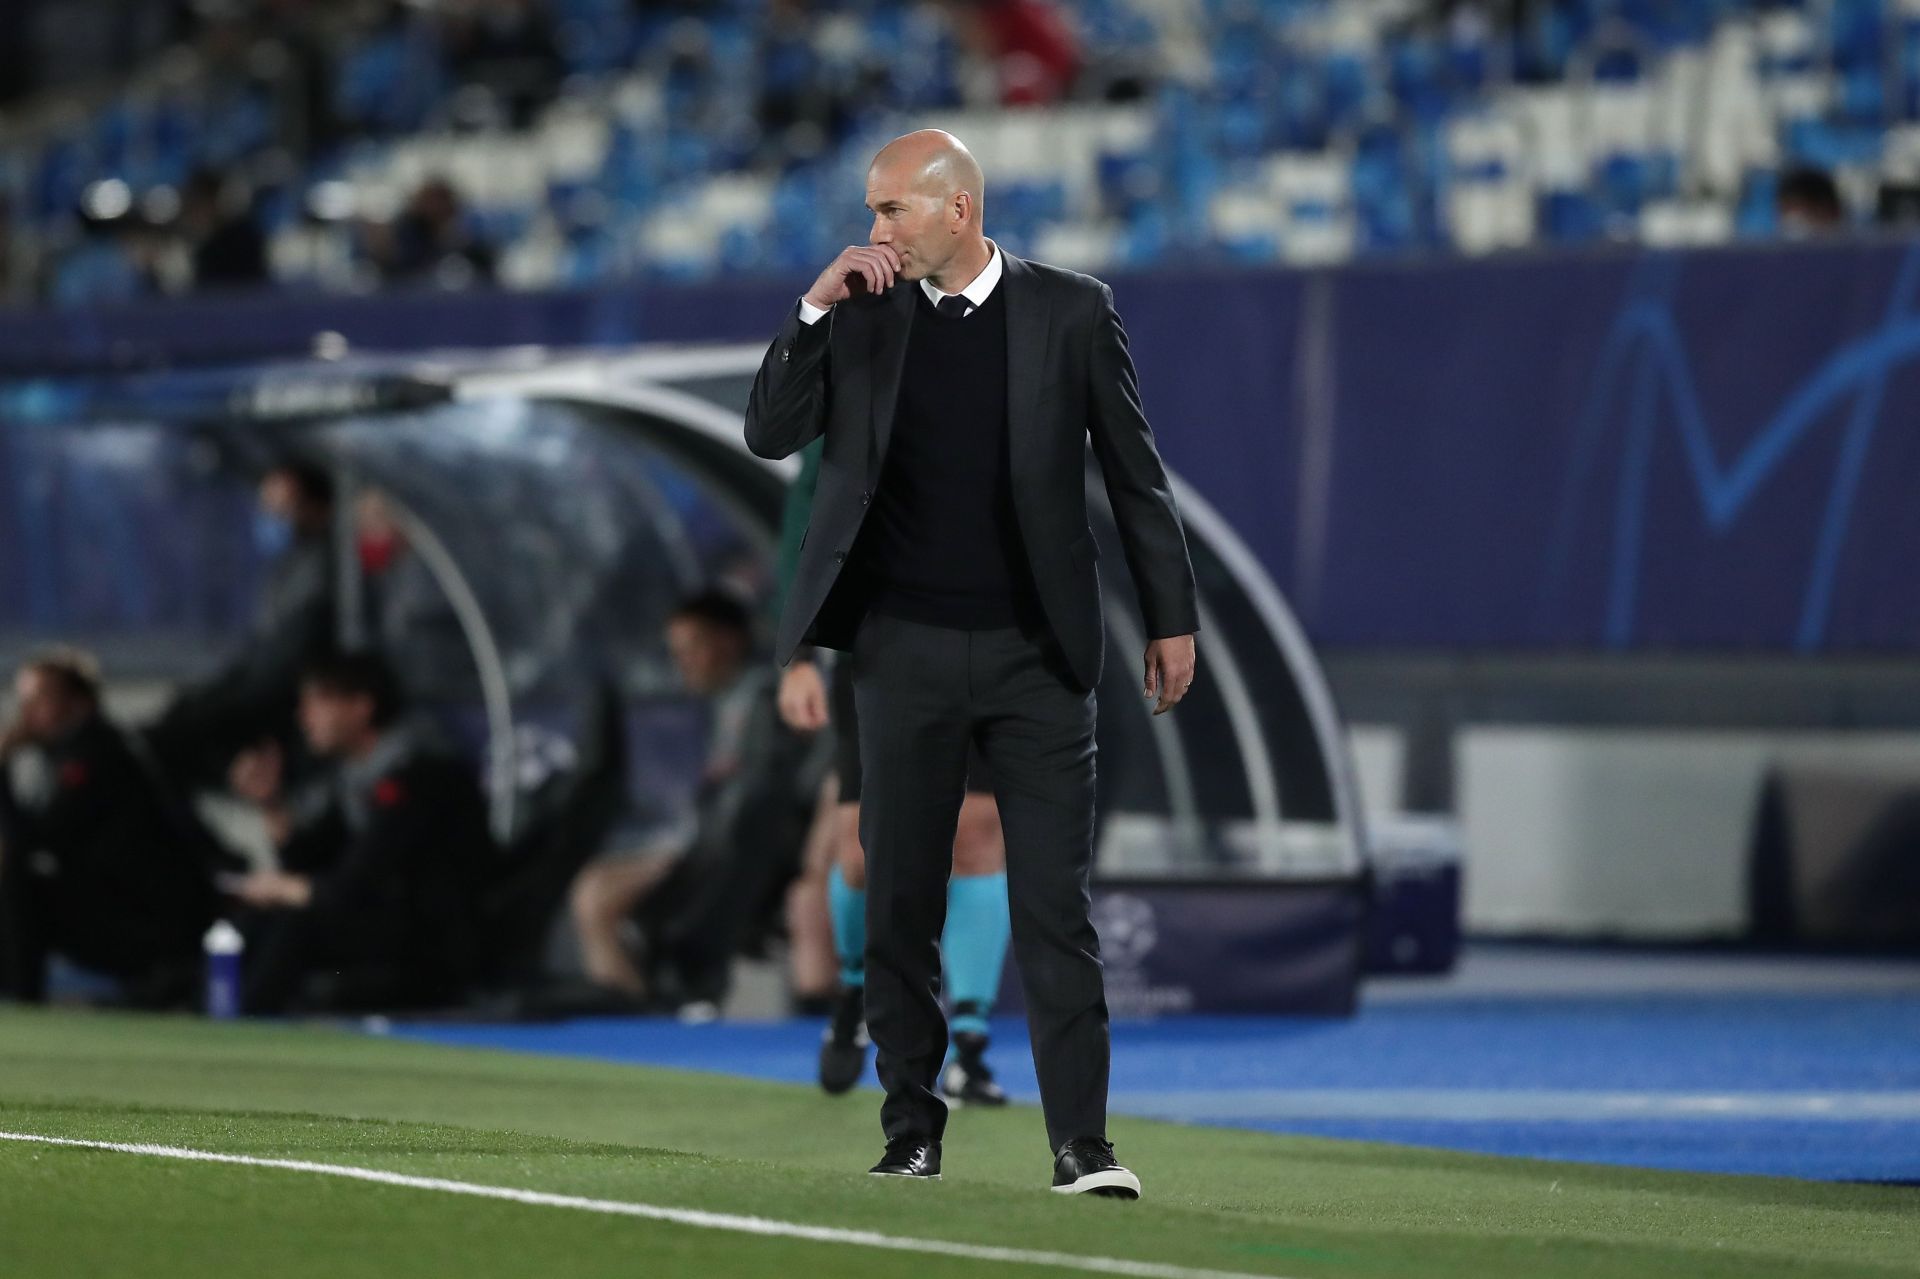 Zinedine Zidane is one of the most successful managers in the UEFA Champions League.